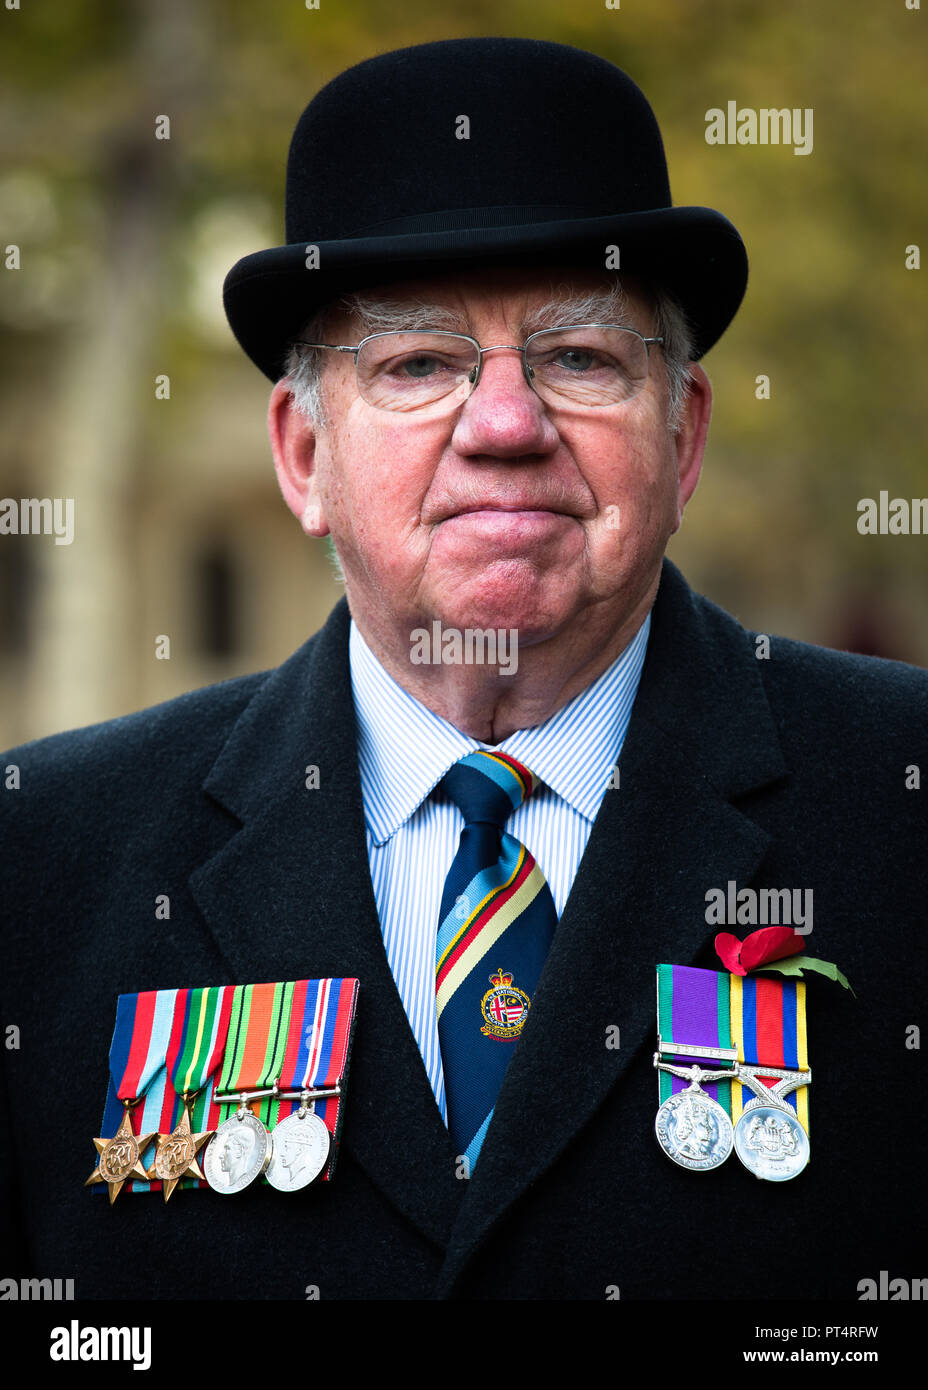 RAF veteran with bowler hat and wearing his medals attending the Remembrance Day ceremony in London. Stock Photo